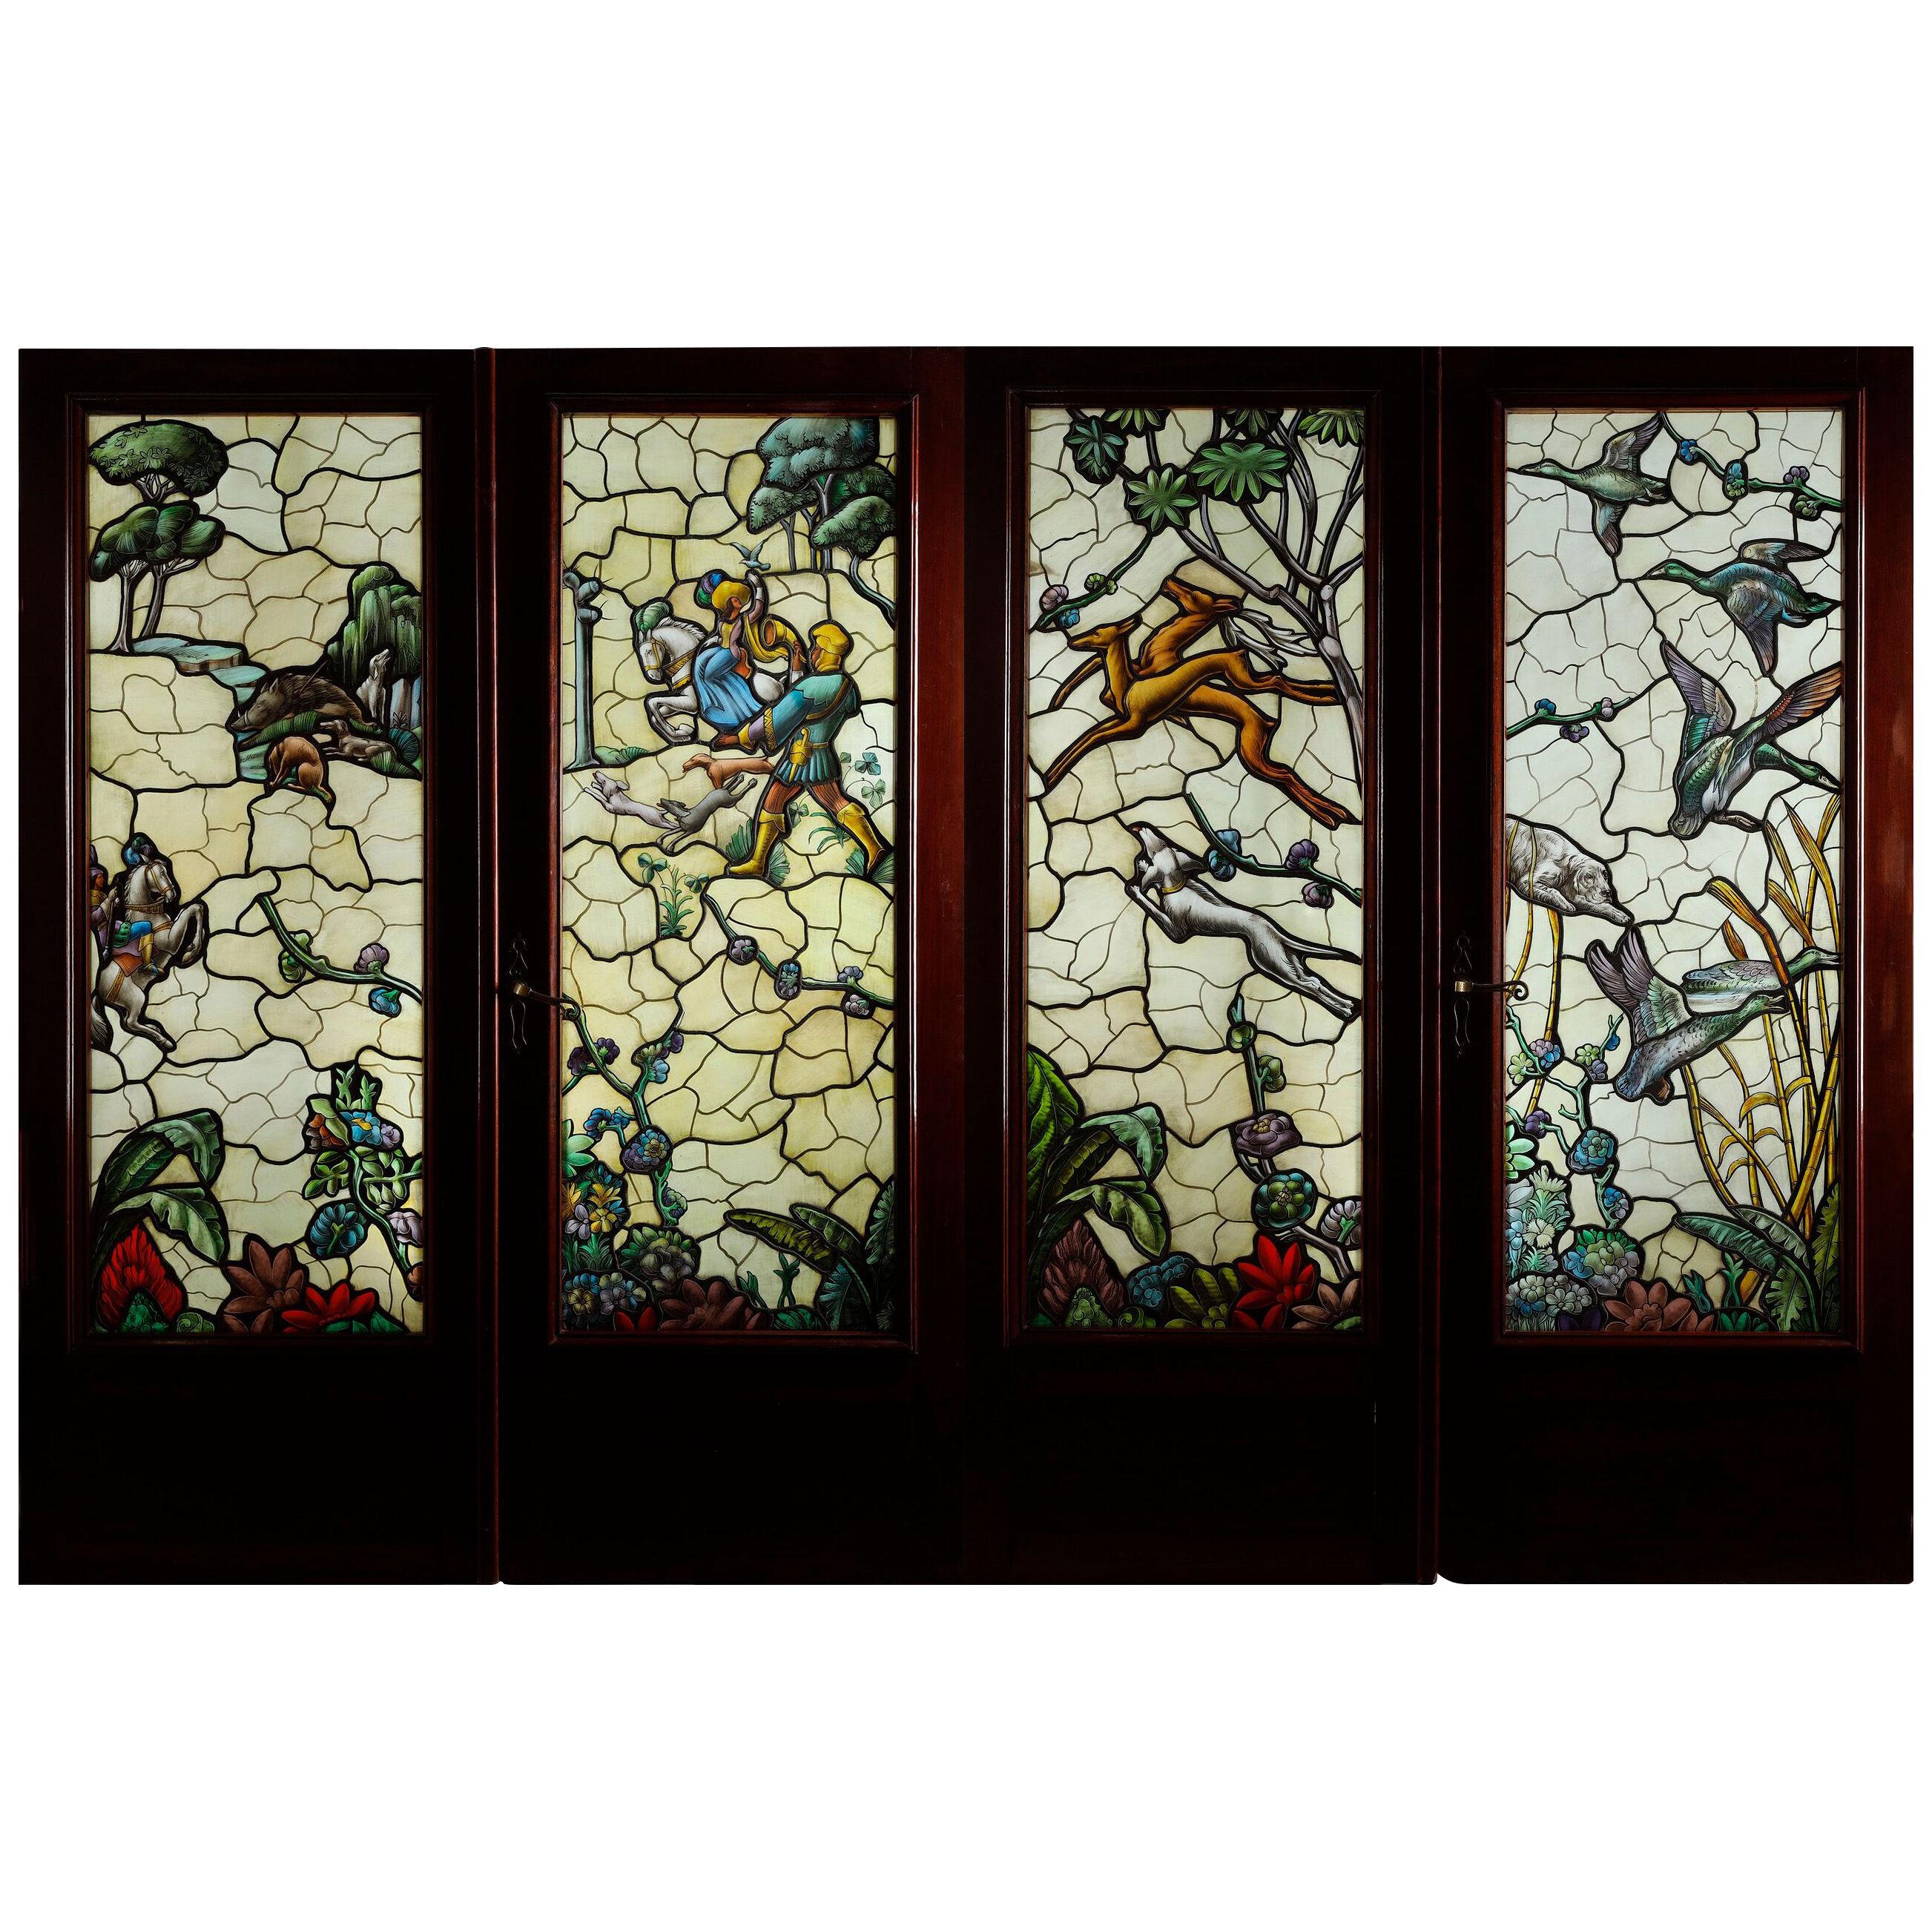 "Hunting with Hounds" Polychromed Stained Glass in Two Double Doors, Fr., c.1950